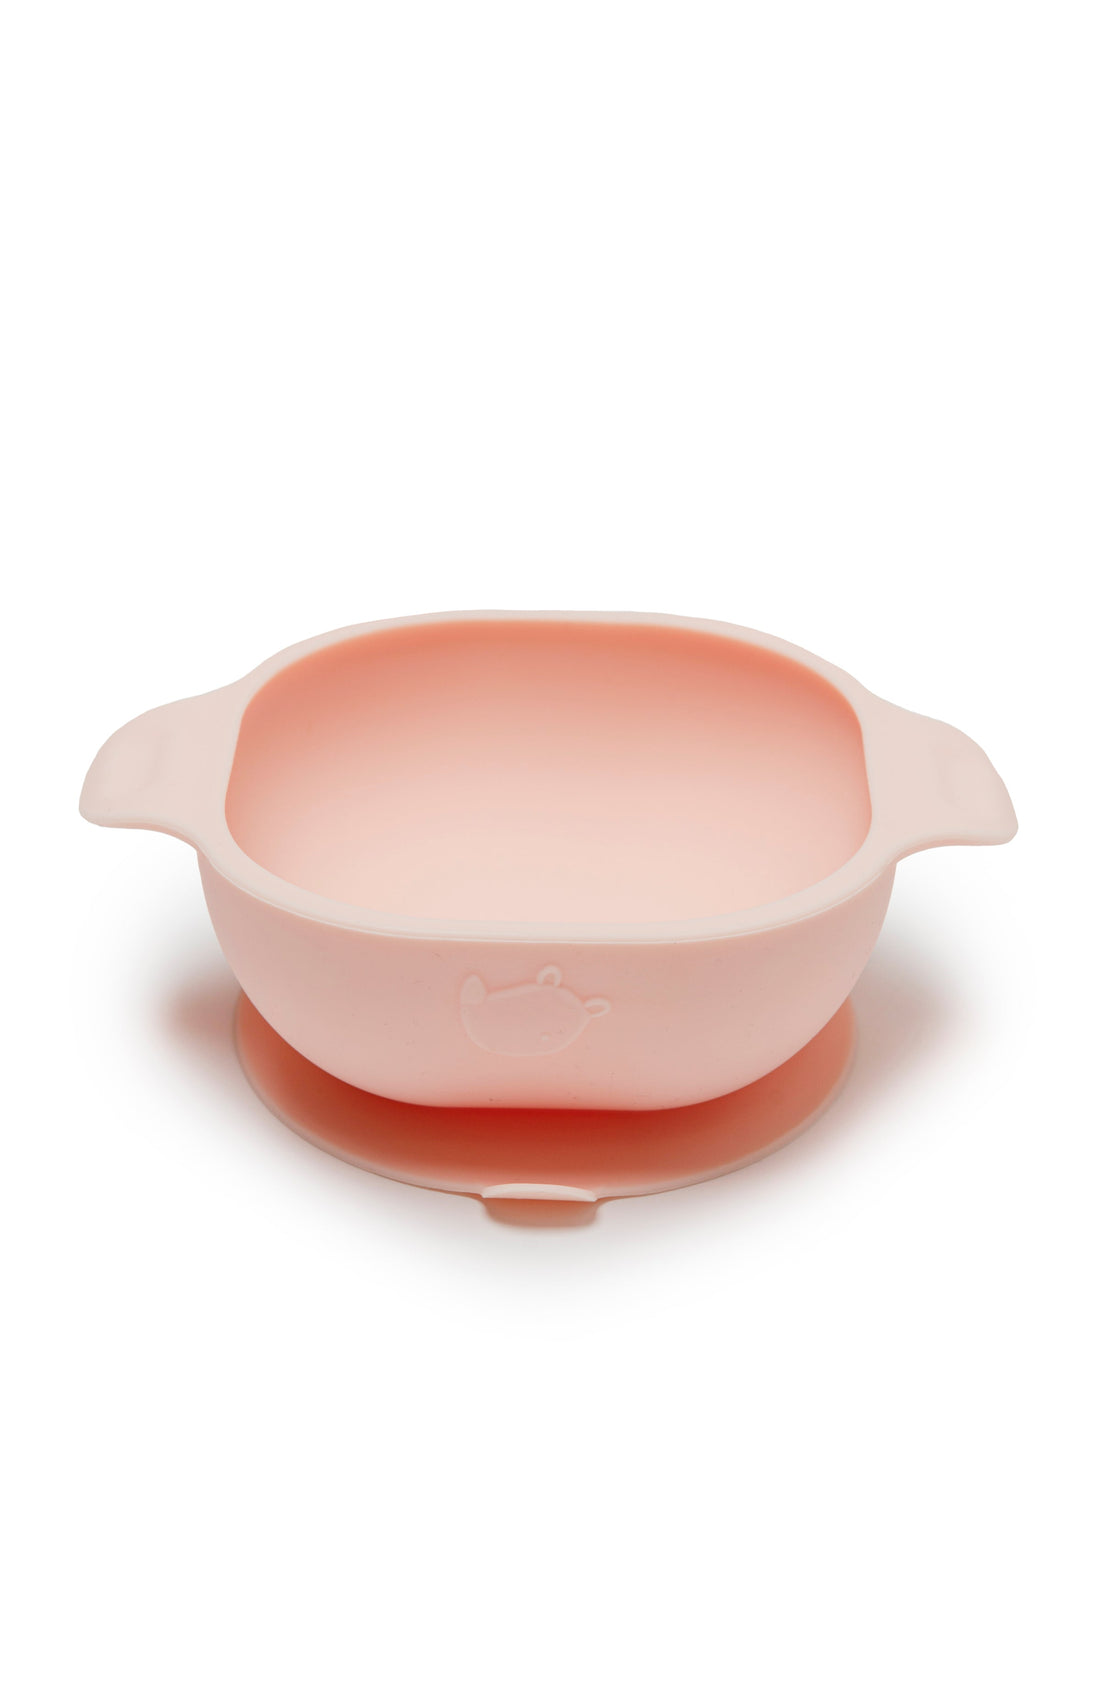 Born to be Wild Silicone Snack Bowl Eat Loulou Lollipop Blush Pink 